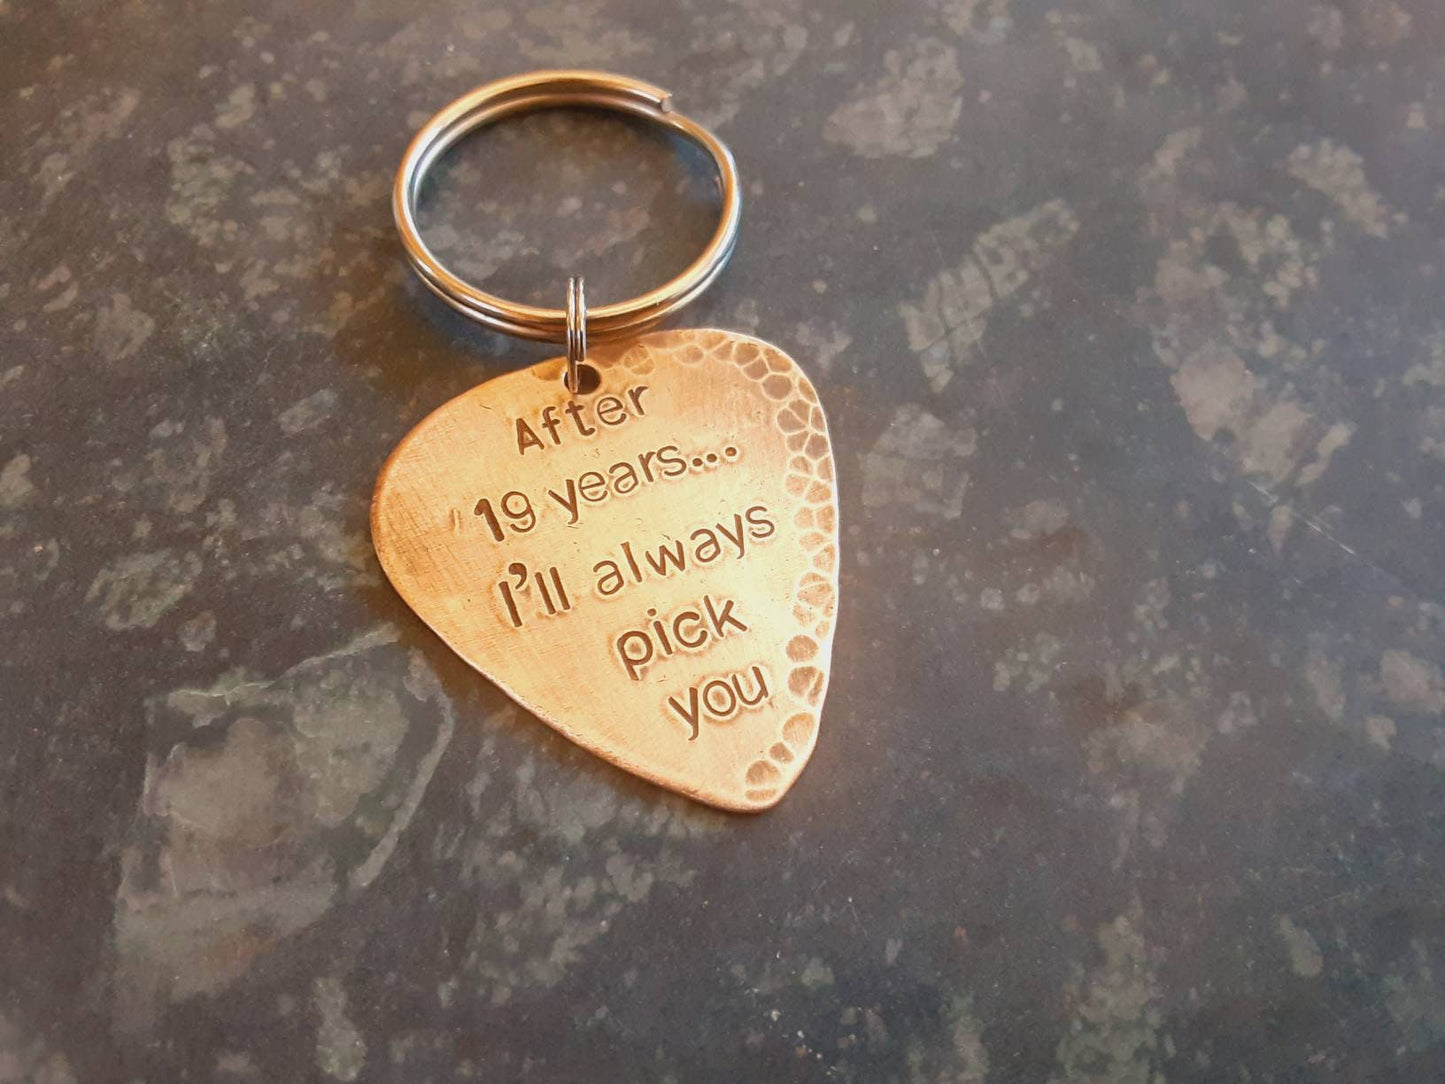 Bronze guitar pick keyring -a gift idea for 8th or 19th anniversary